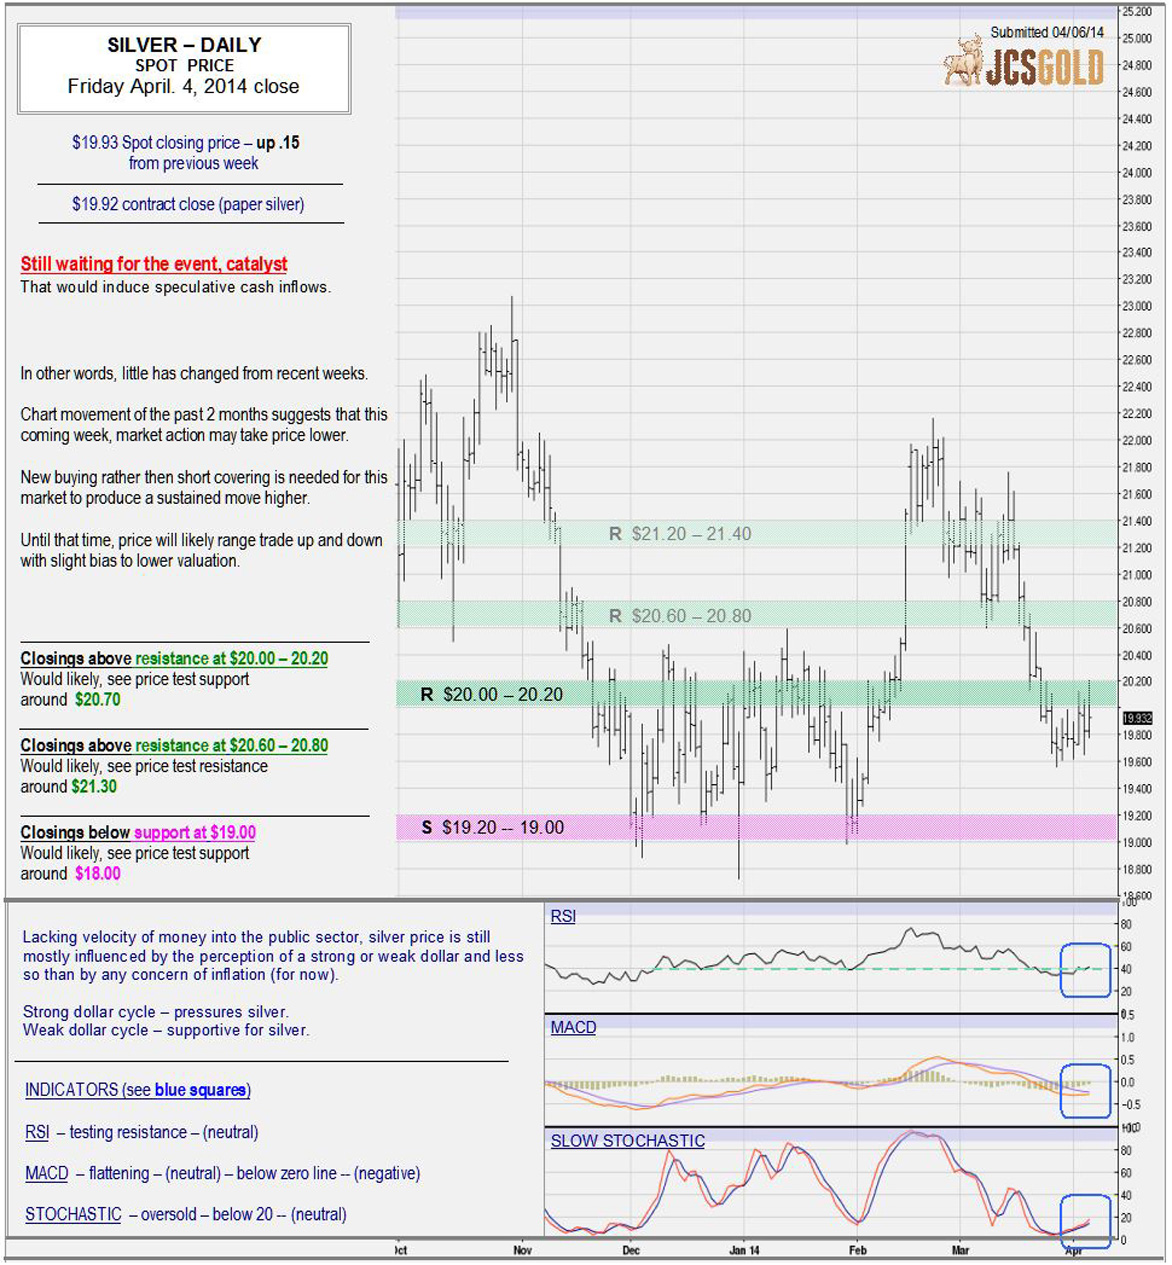 April 4, 2014 chart & commentary